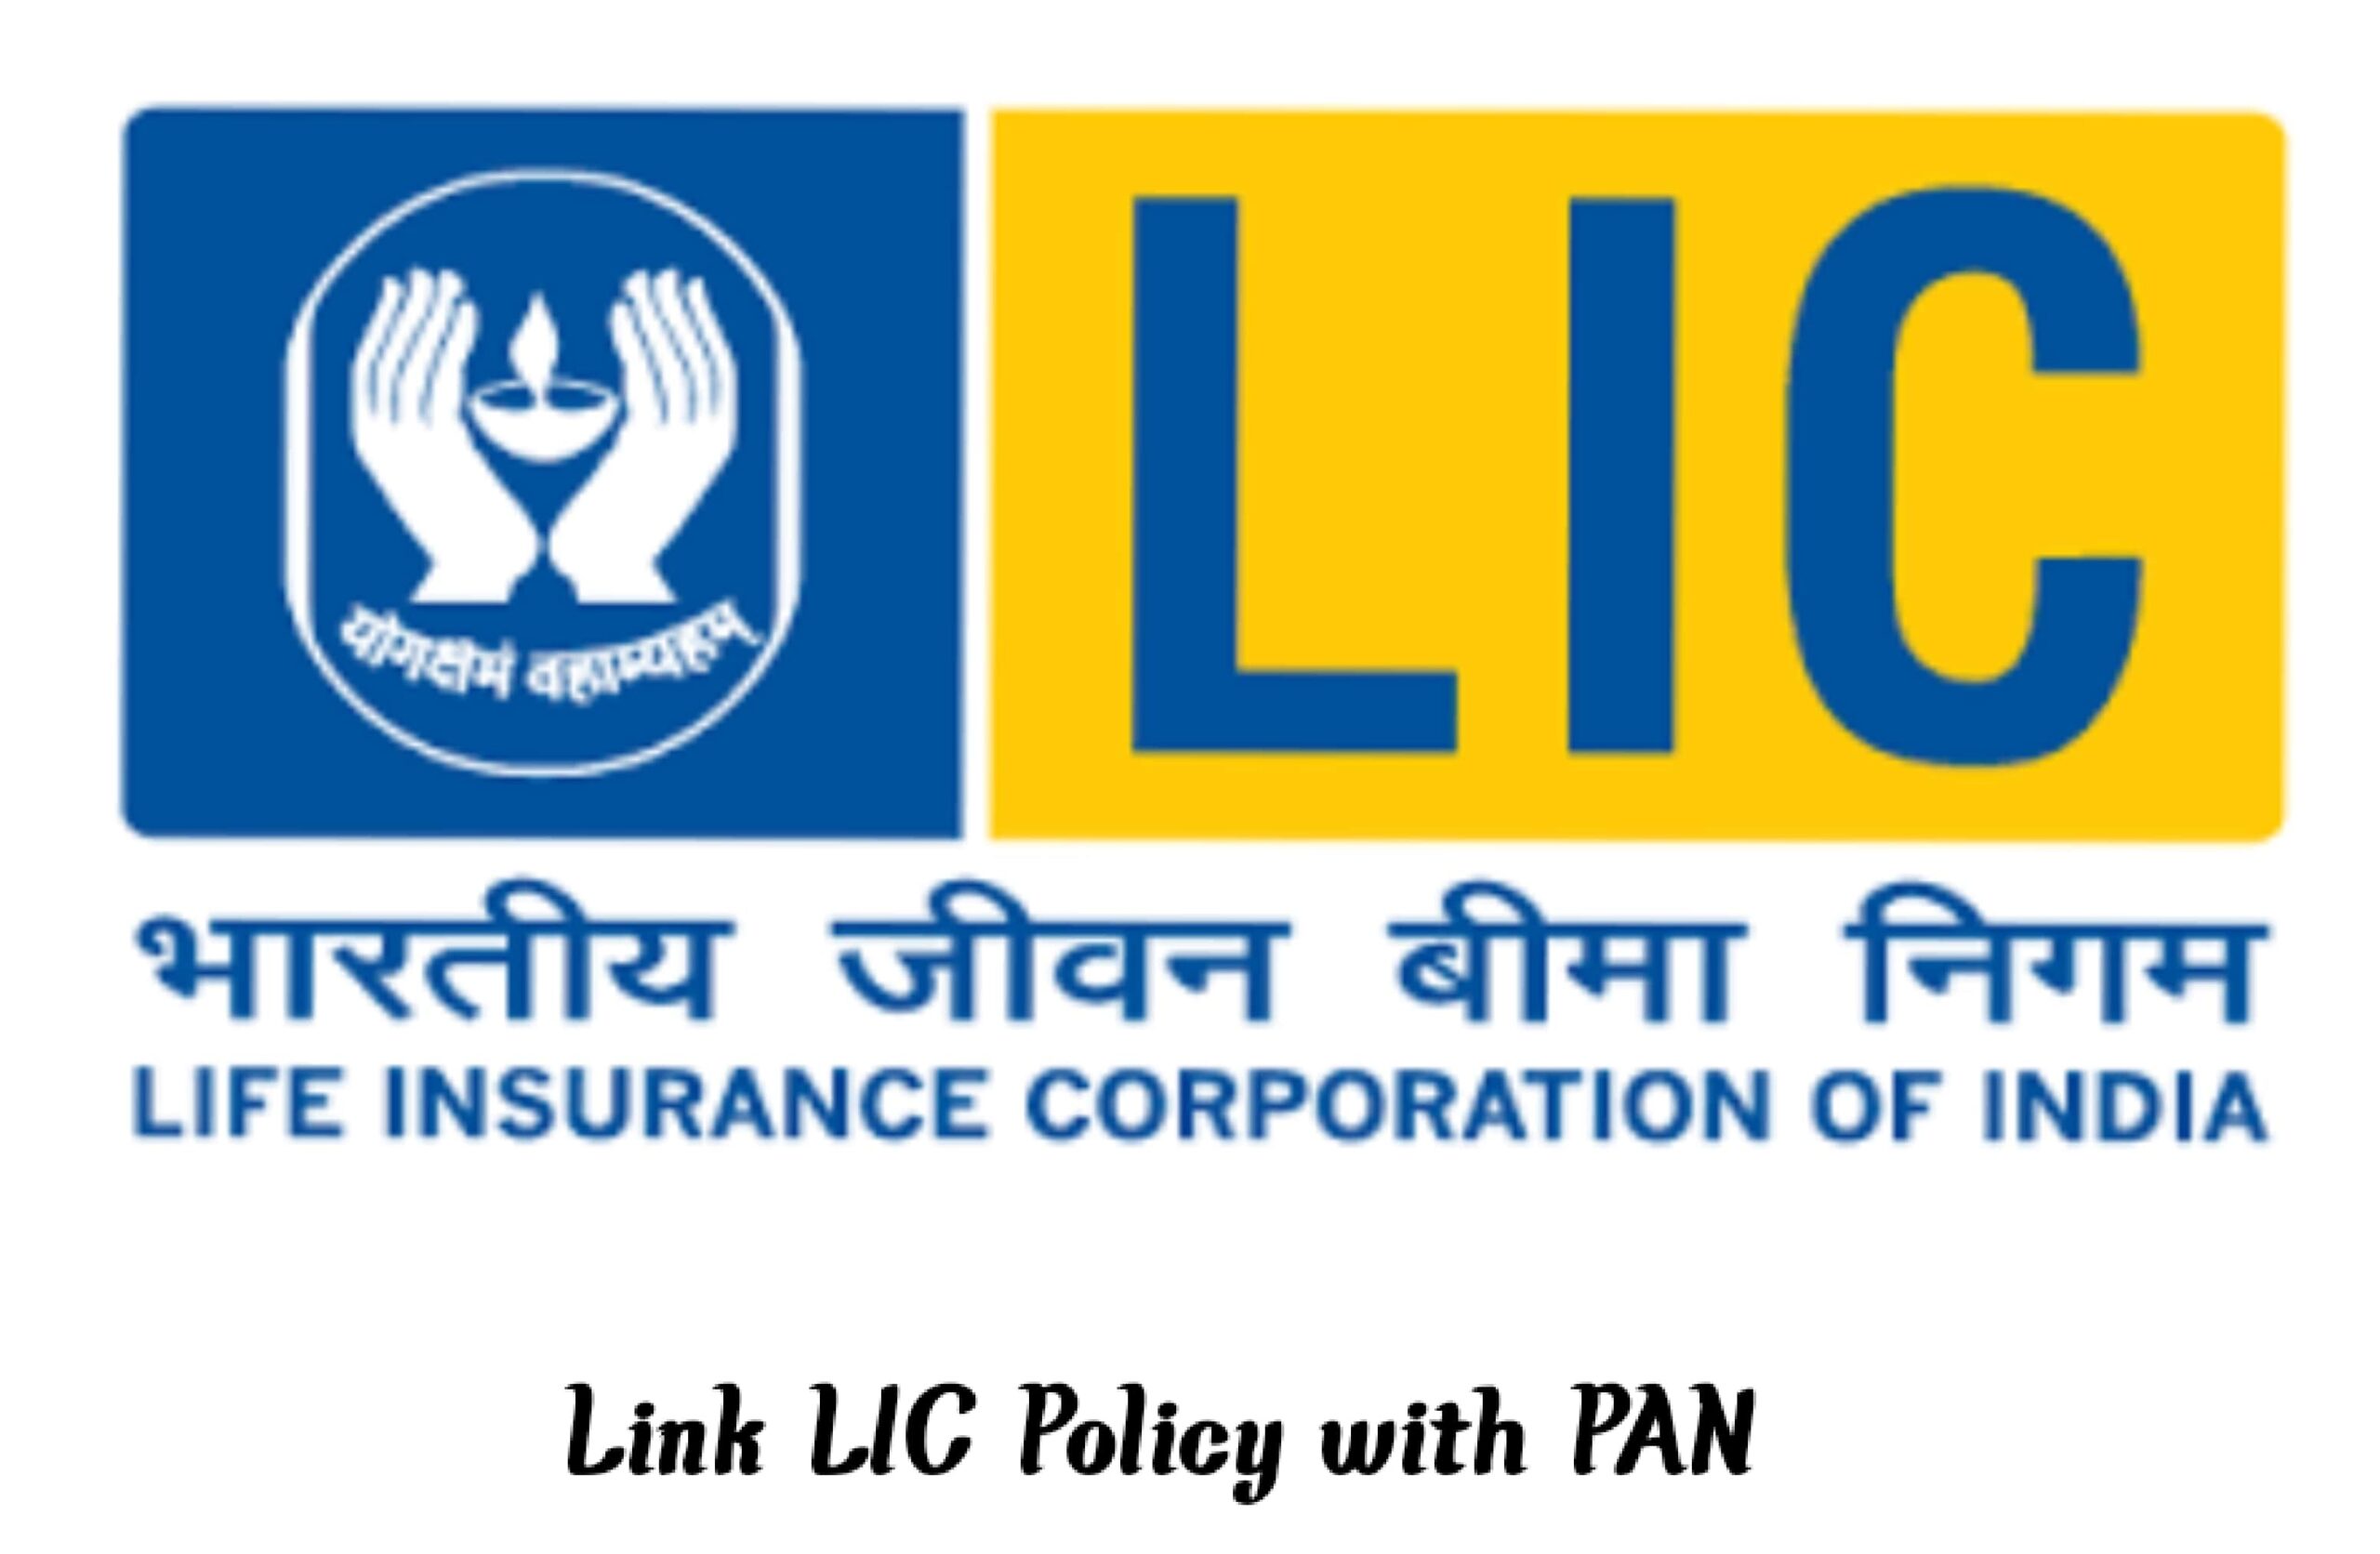 Link lic policy with pan